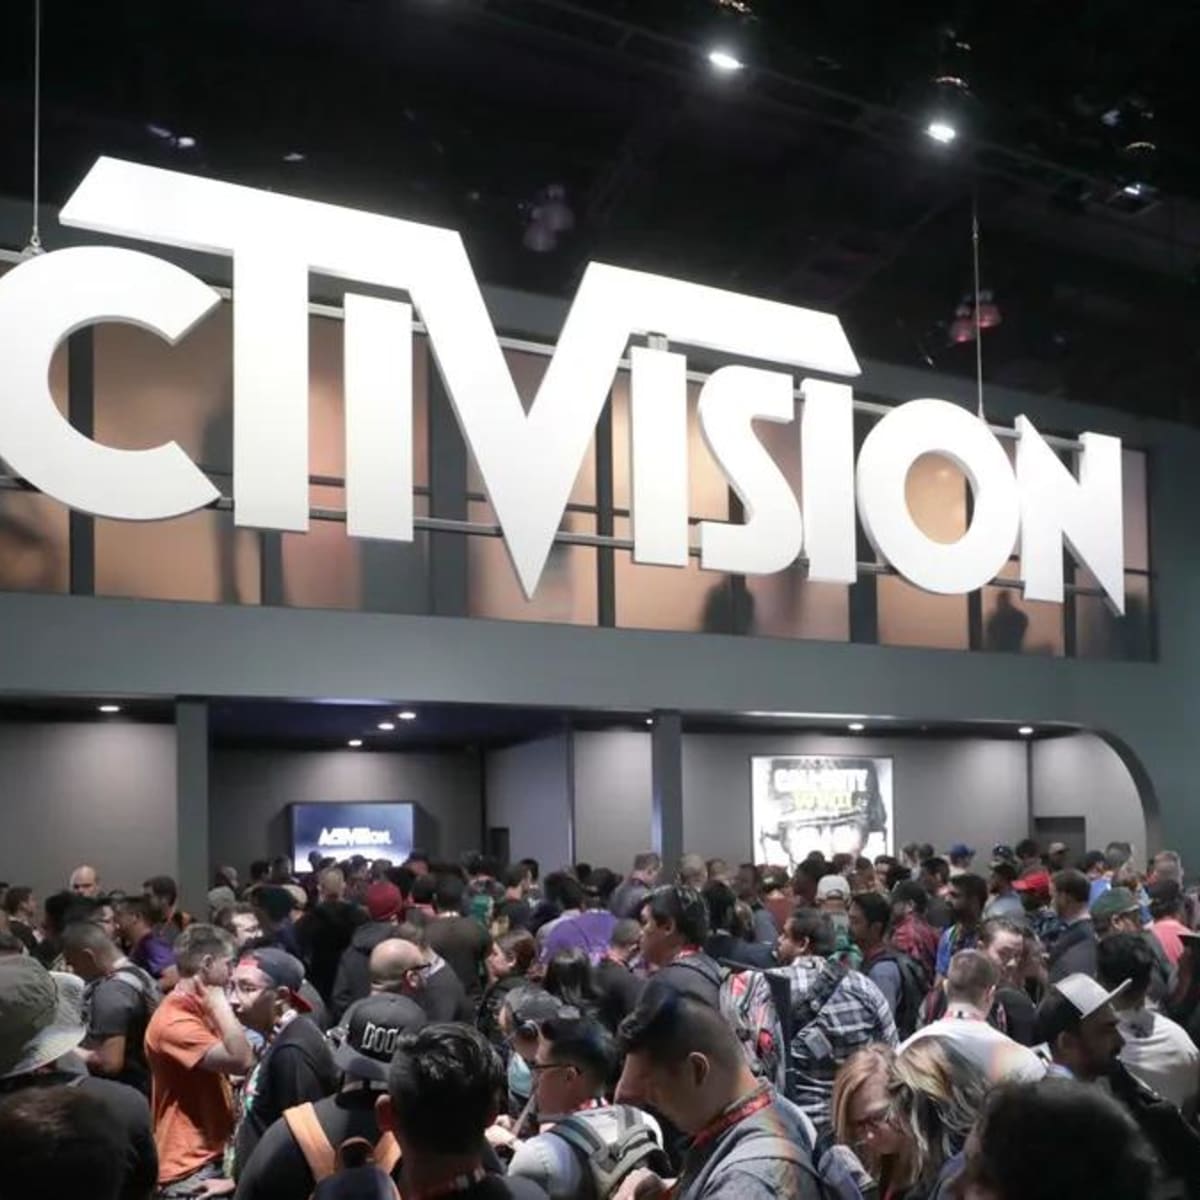 Microsoft buys Activision: How Sony's response could boost PC